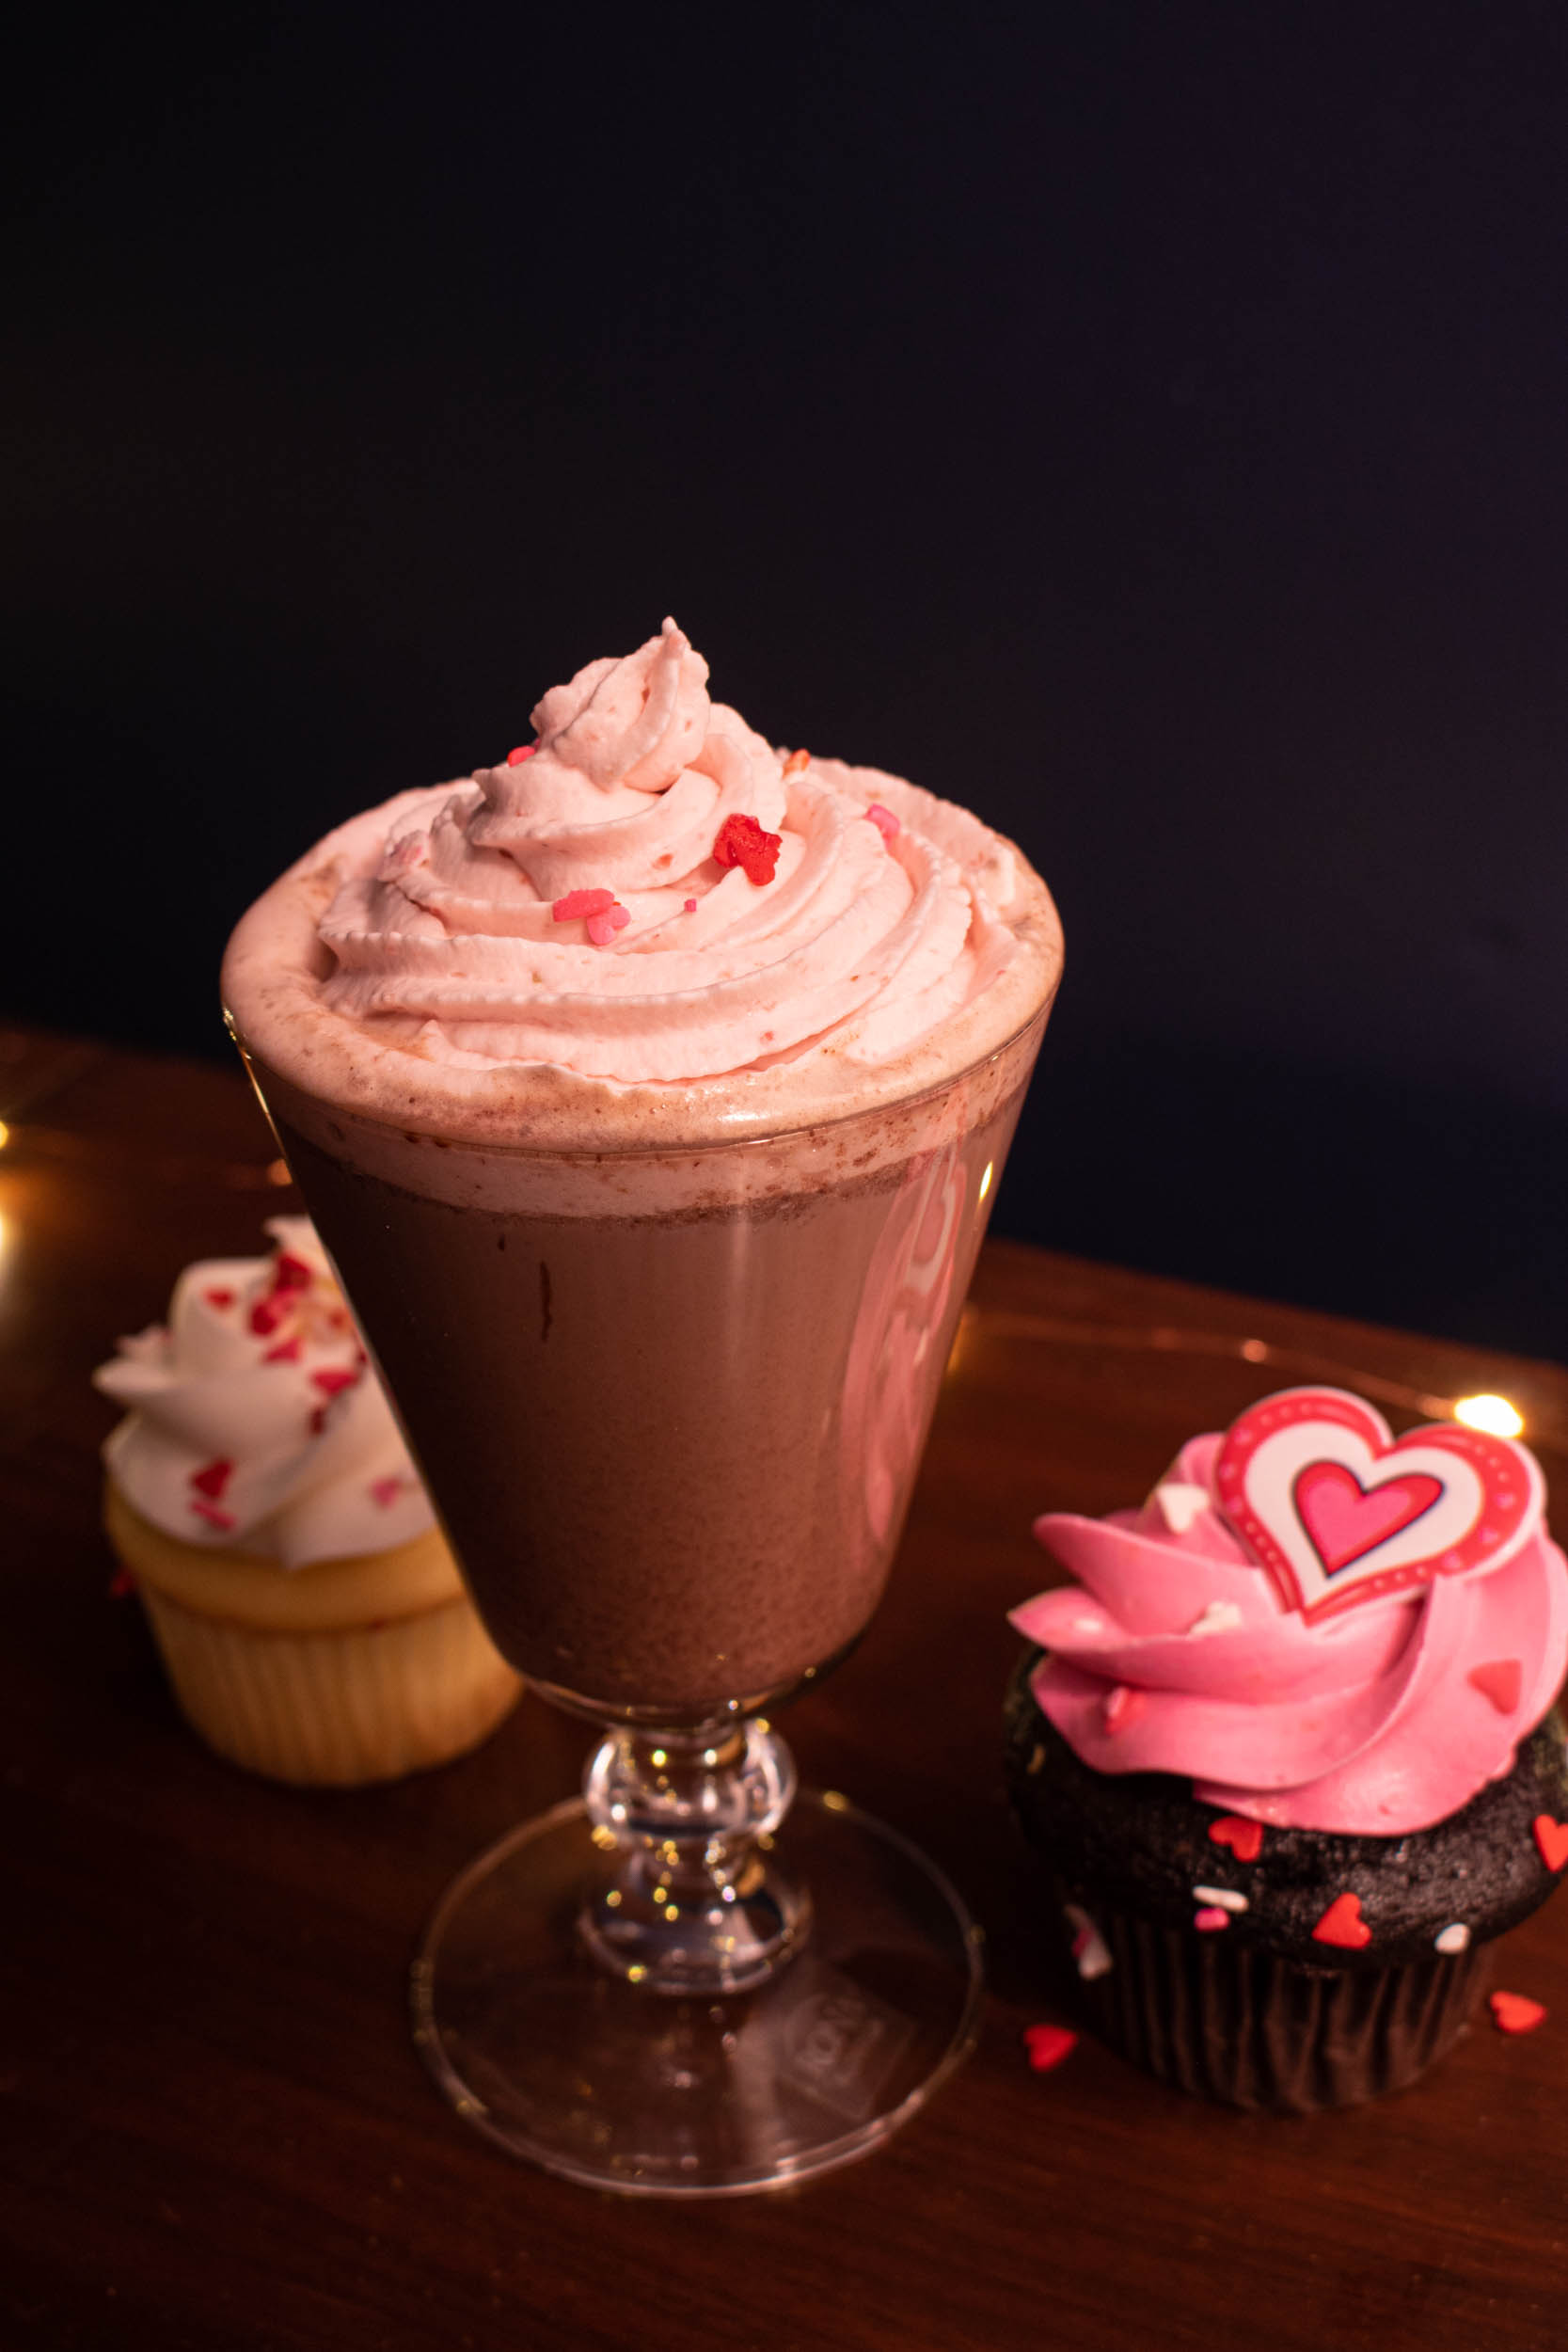 https://www.firstpourcocktails.com/wp-content/uploads/2021/02/Chocolate-Covered-Strawberry-Hot-Chocolate.jpg